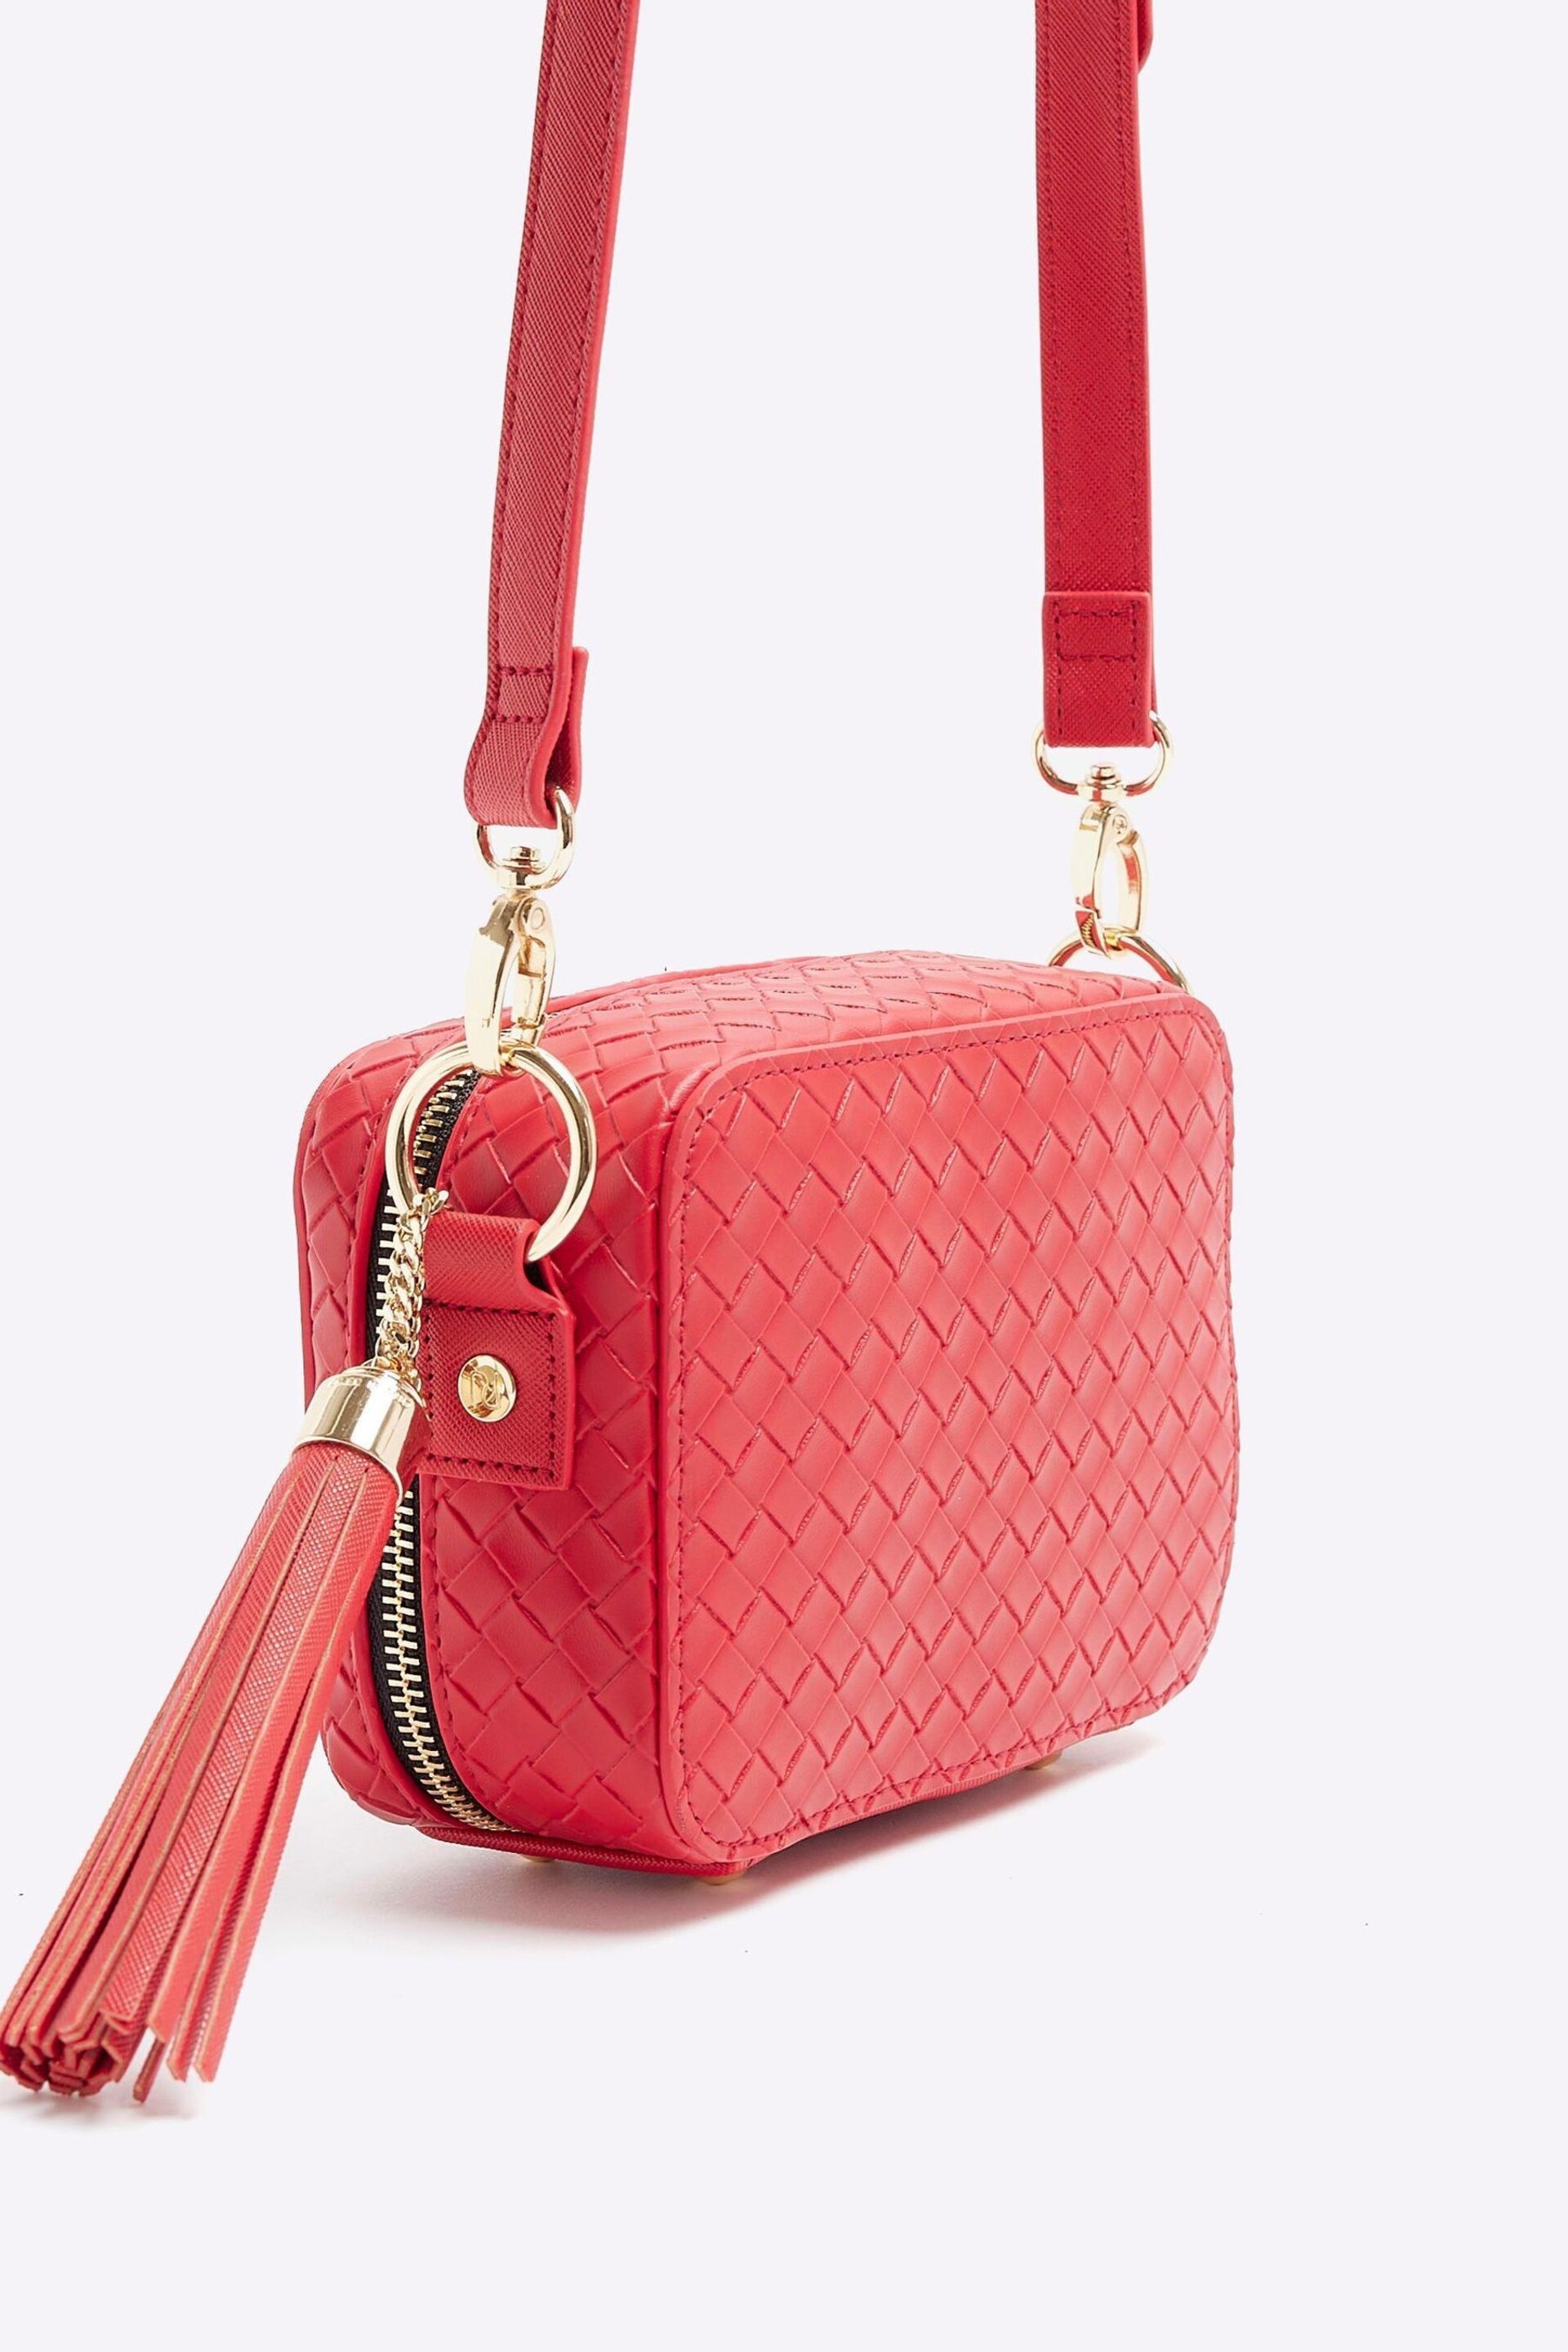 River Island Red Weave Oval Boxy Bag - Image 5 of 5